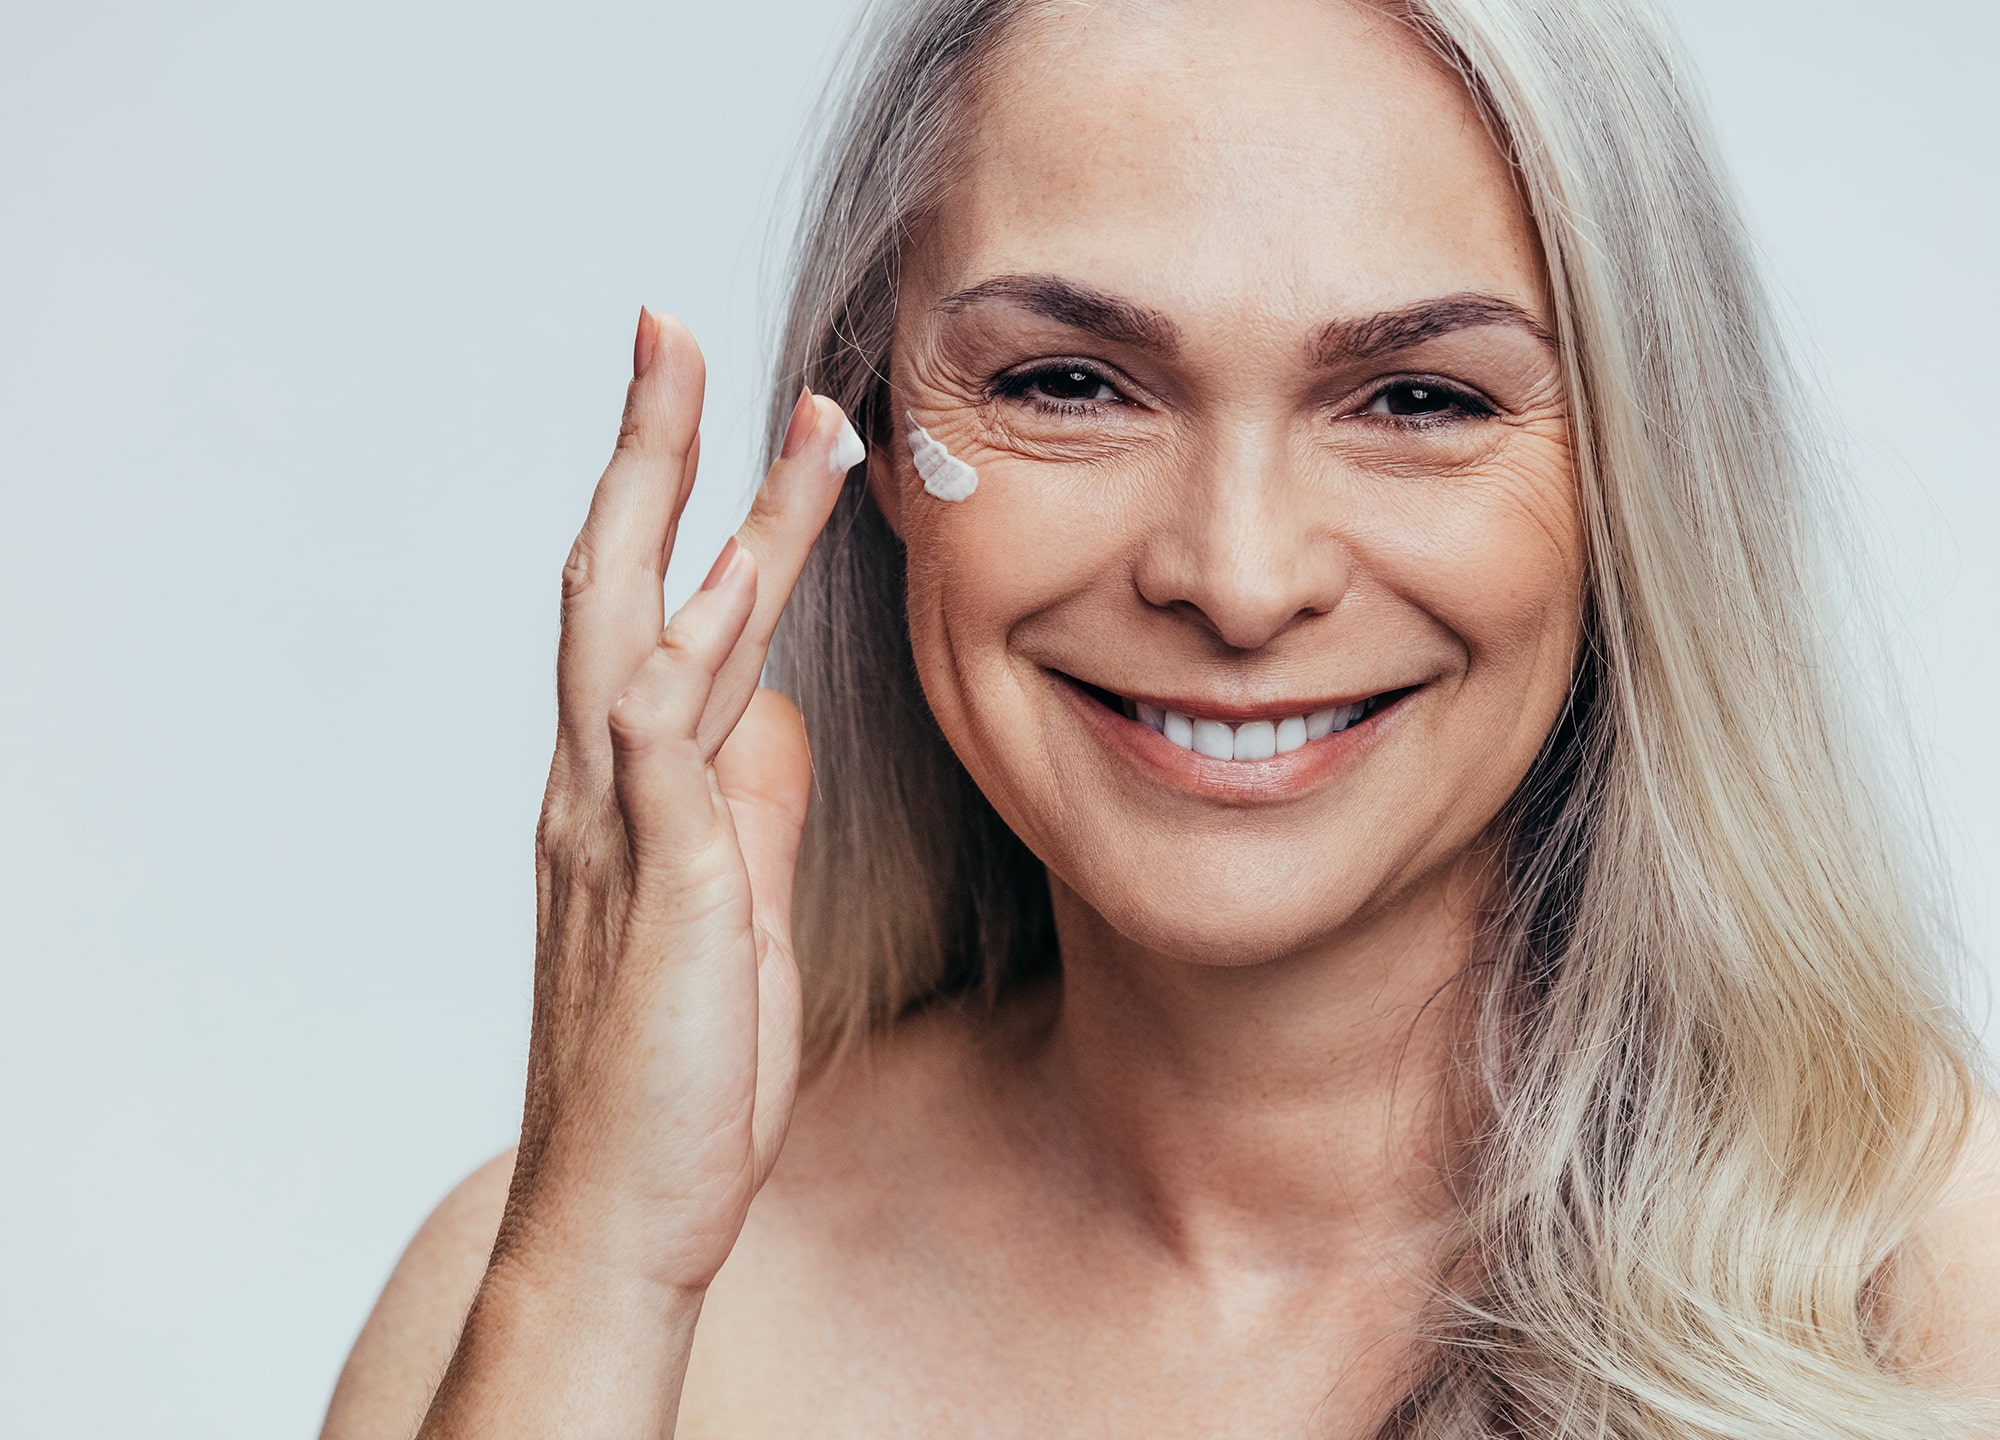 Only a few ingredients and technologies have actually been proven to reduce wrinkles, and it’s crucial to know what works—and what’s just marketing.